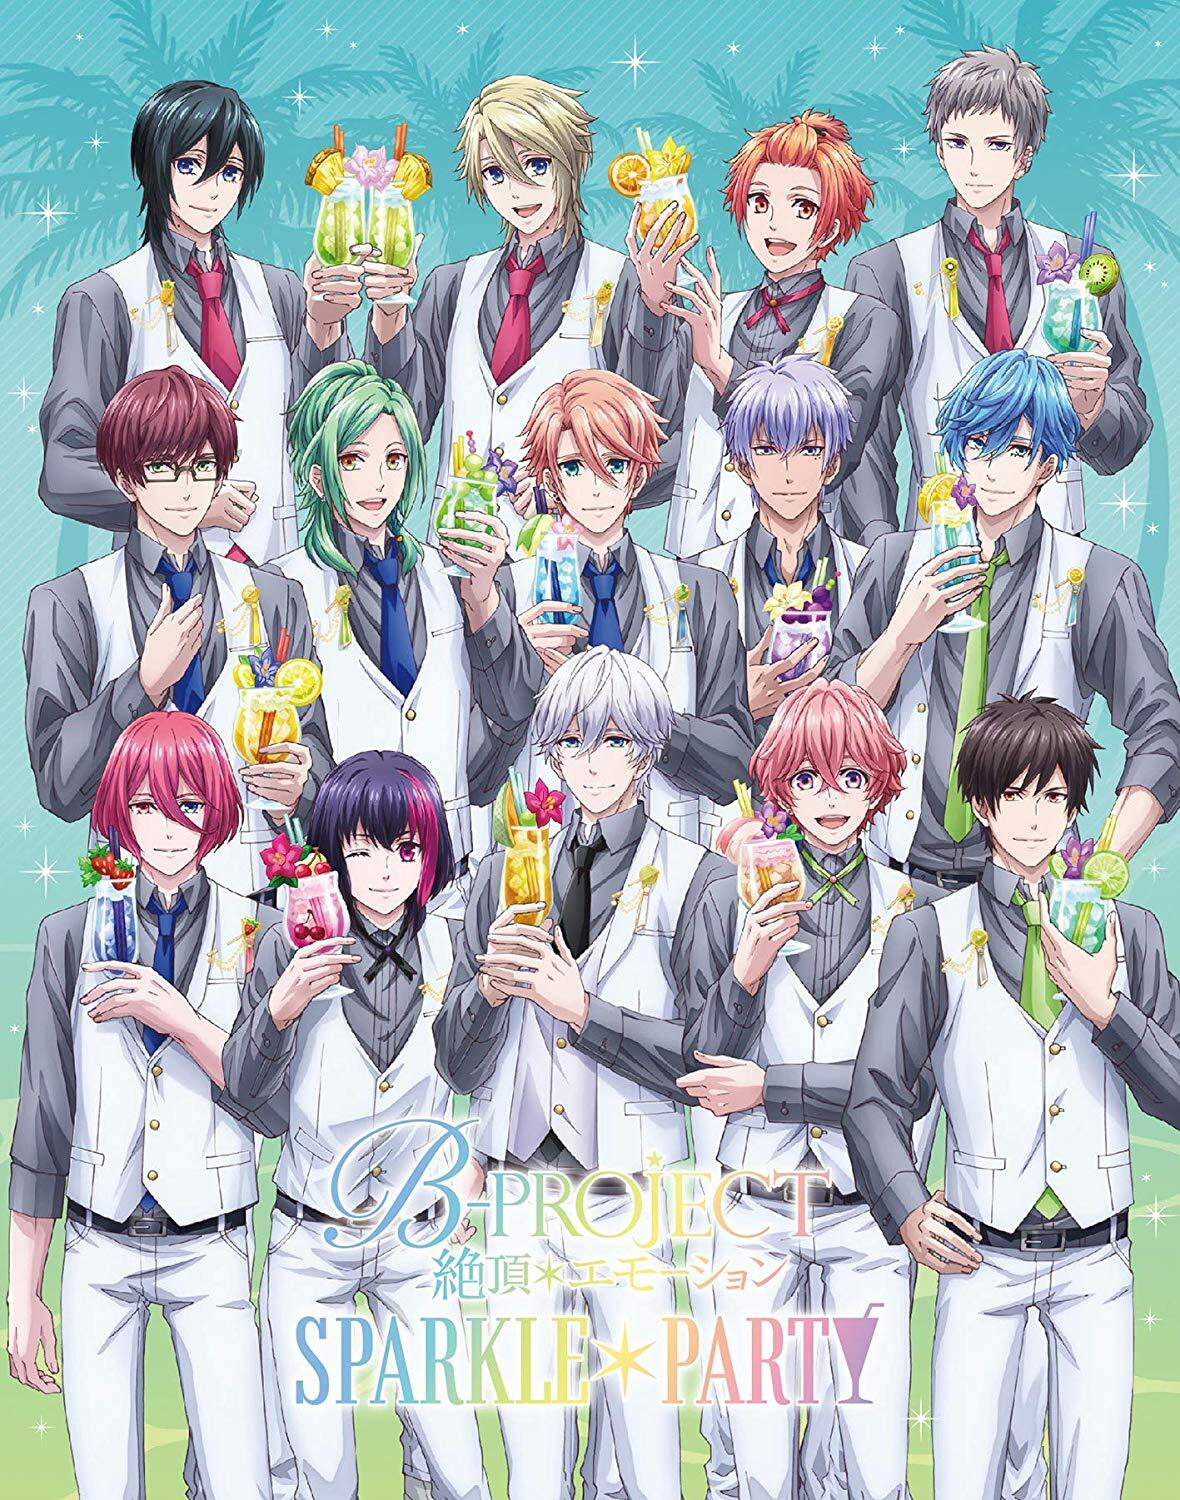 B-PROJECT~絶頂*エモ-ション~ SPARKLE*PARTY(完全生産限定版) [Blu-ray]